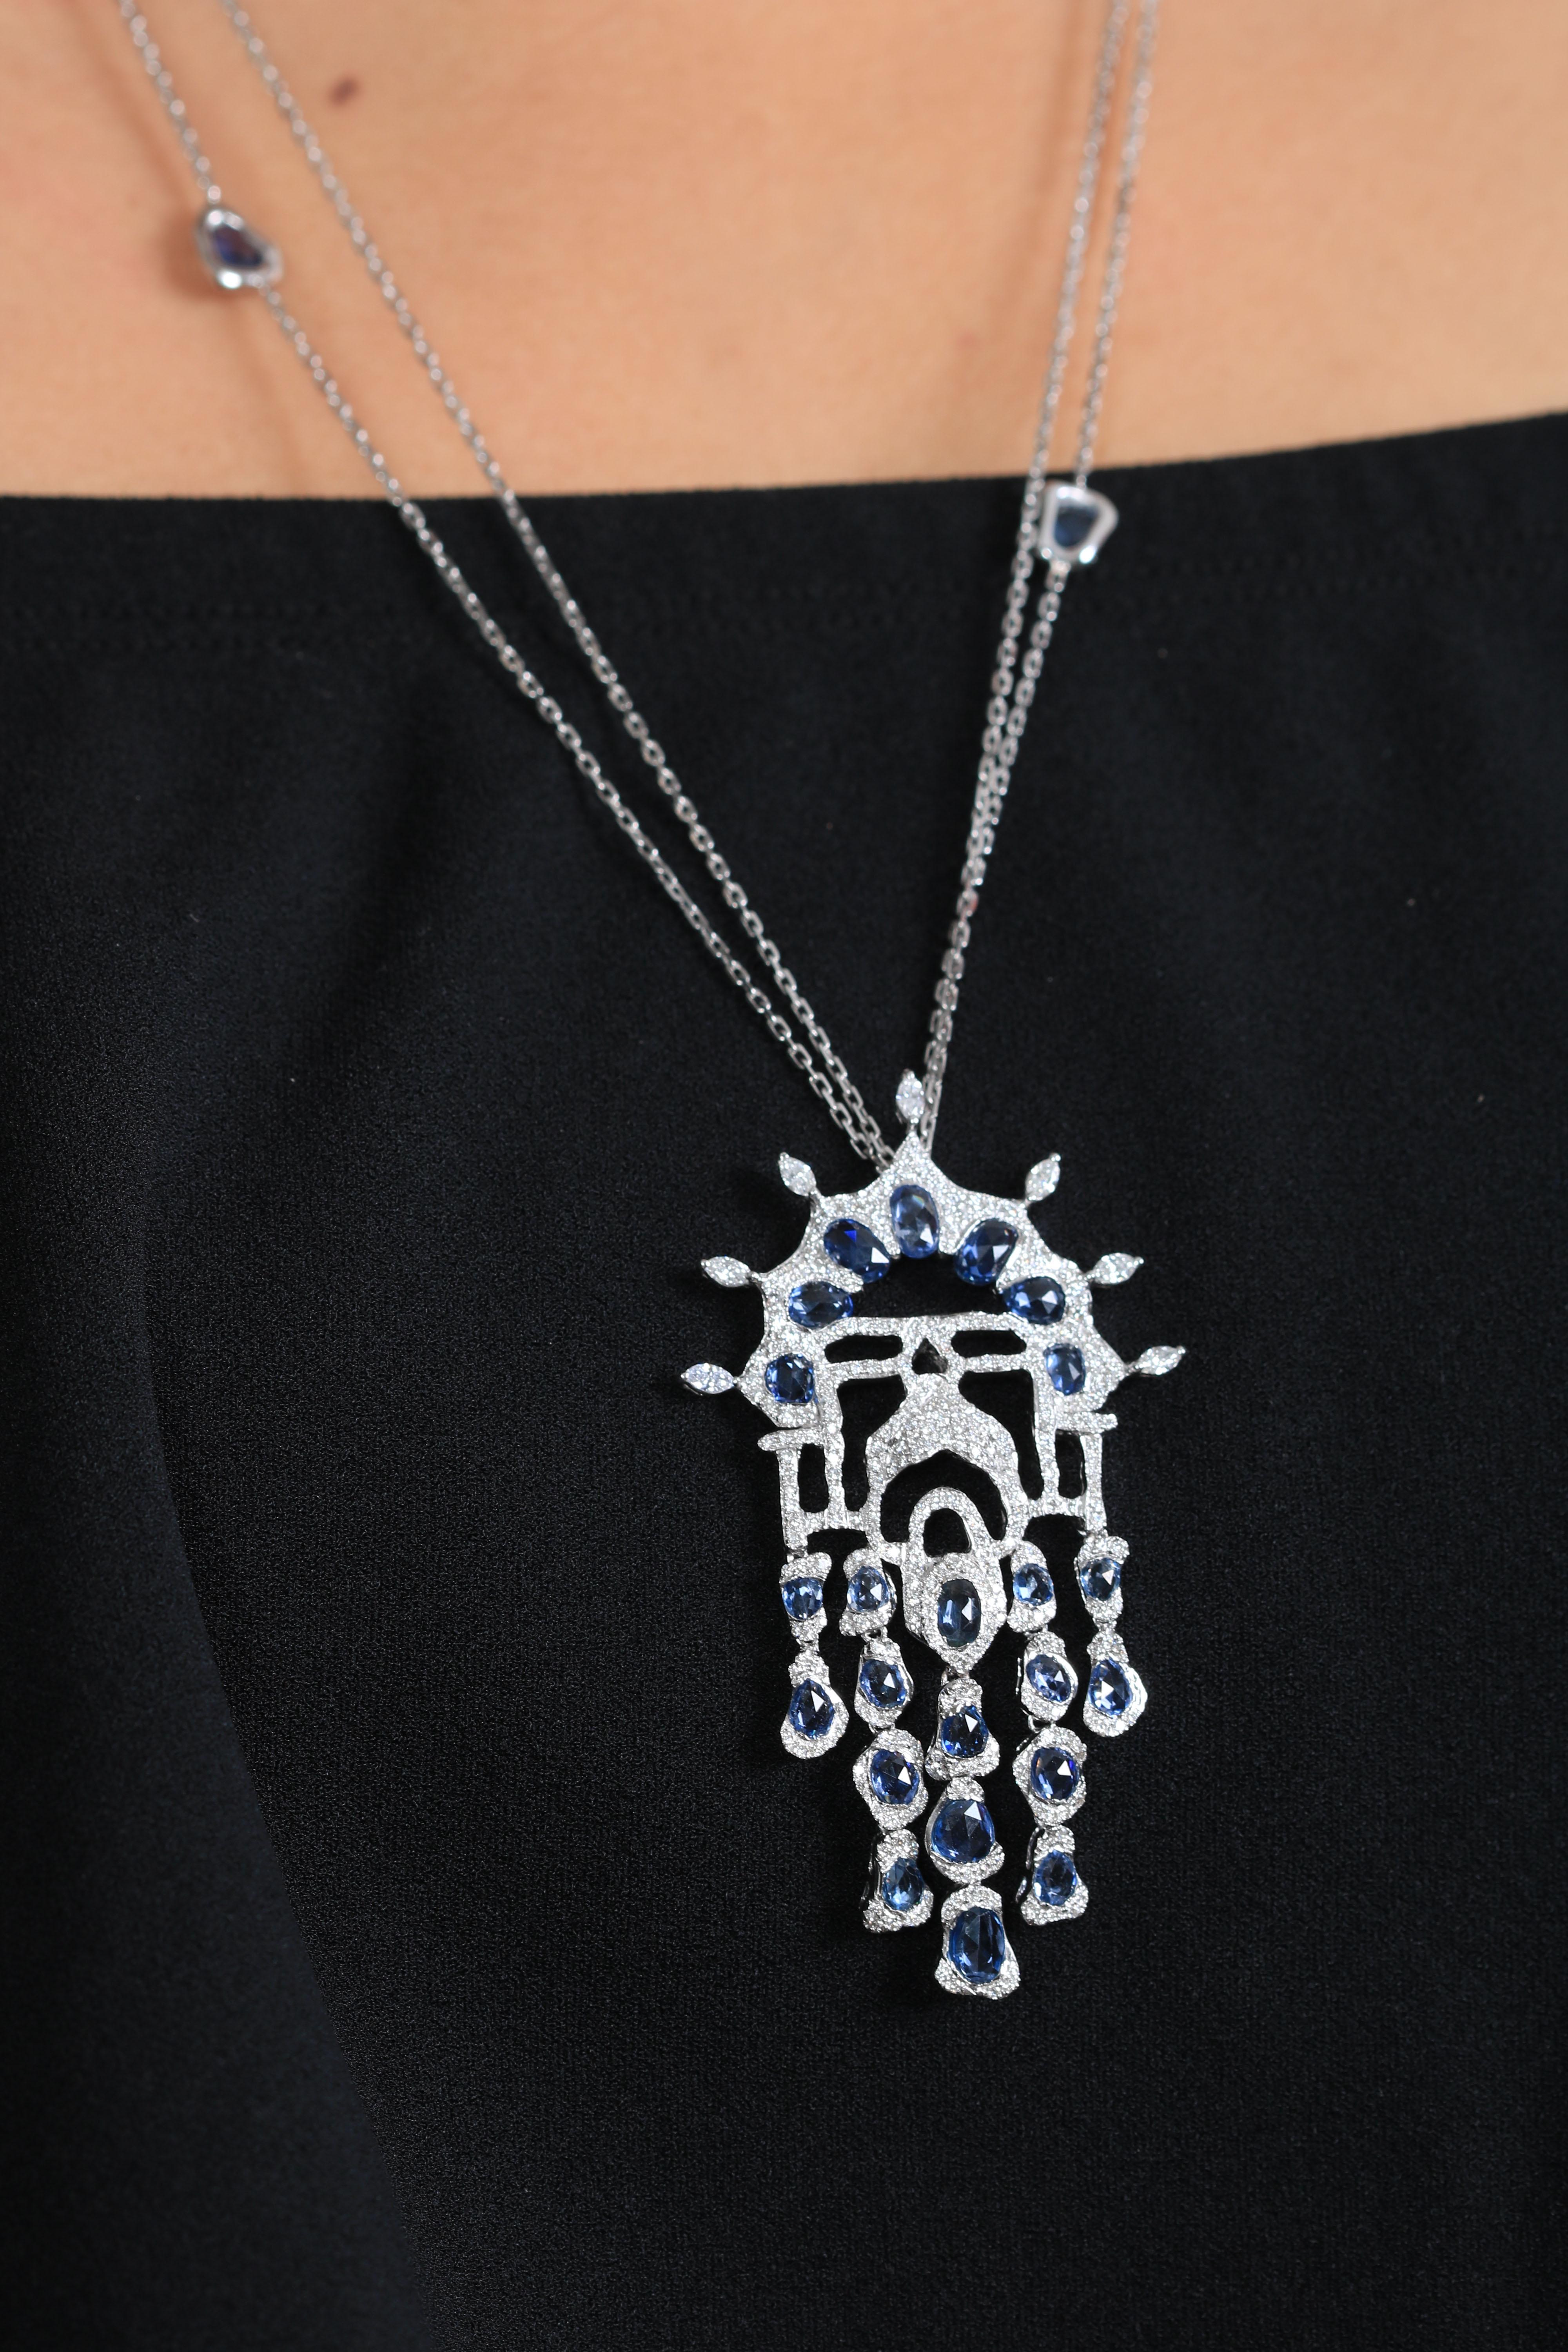 The Arabesque pendant is carefully handmade with exquisite feminine and floral accents. The heavily set blue sapphires and white diamond pendant with various cuts and shapes coming together to achieve a harmonious flow of luxury. An exceptional